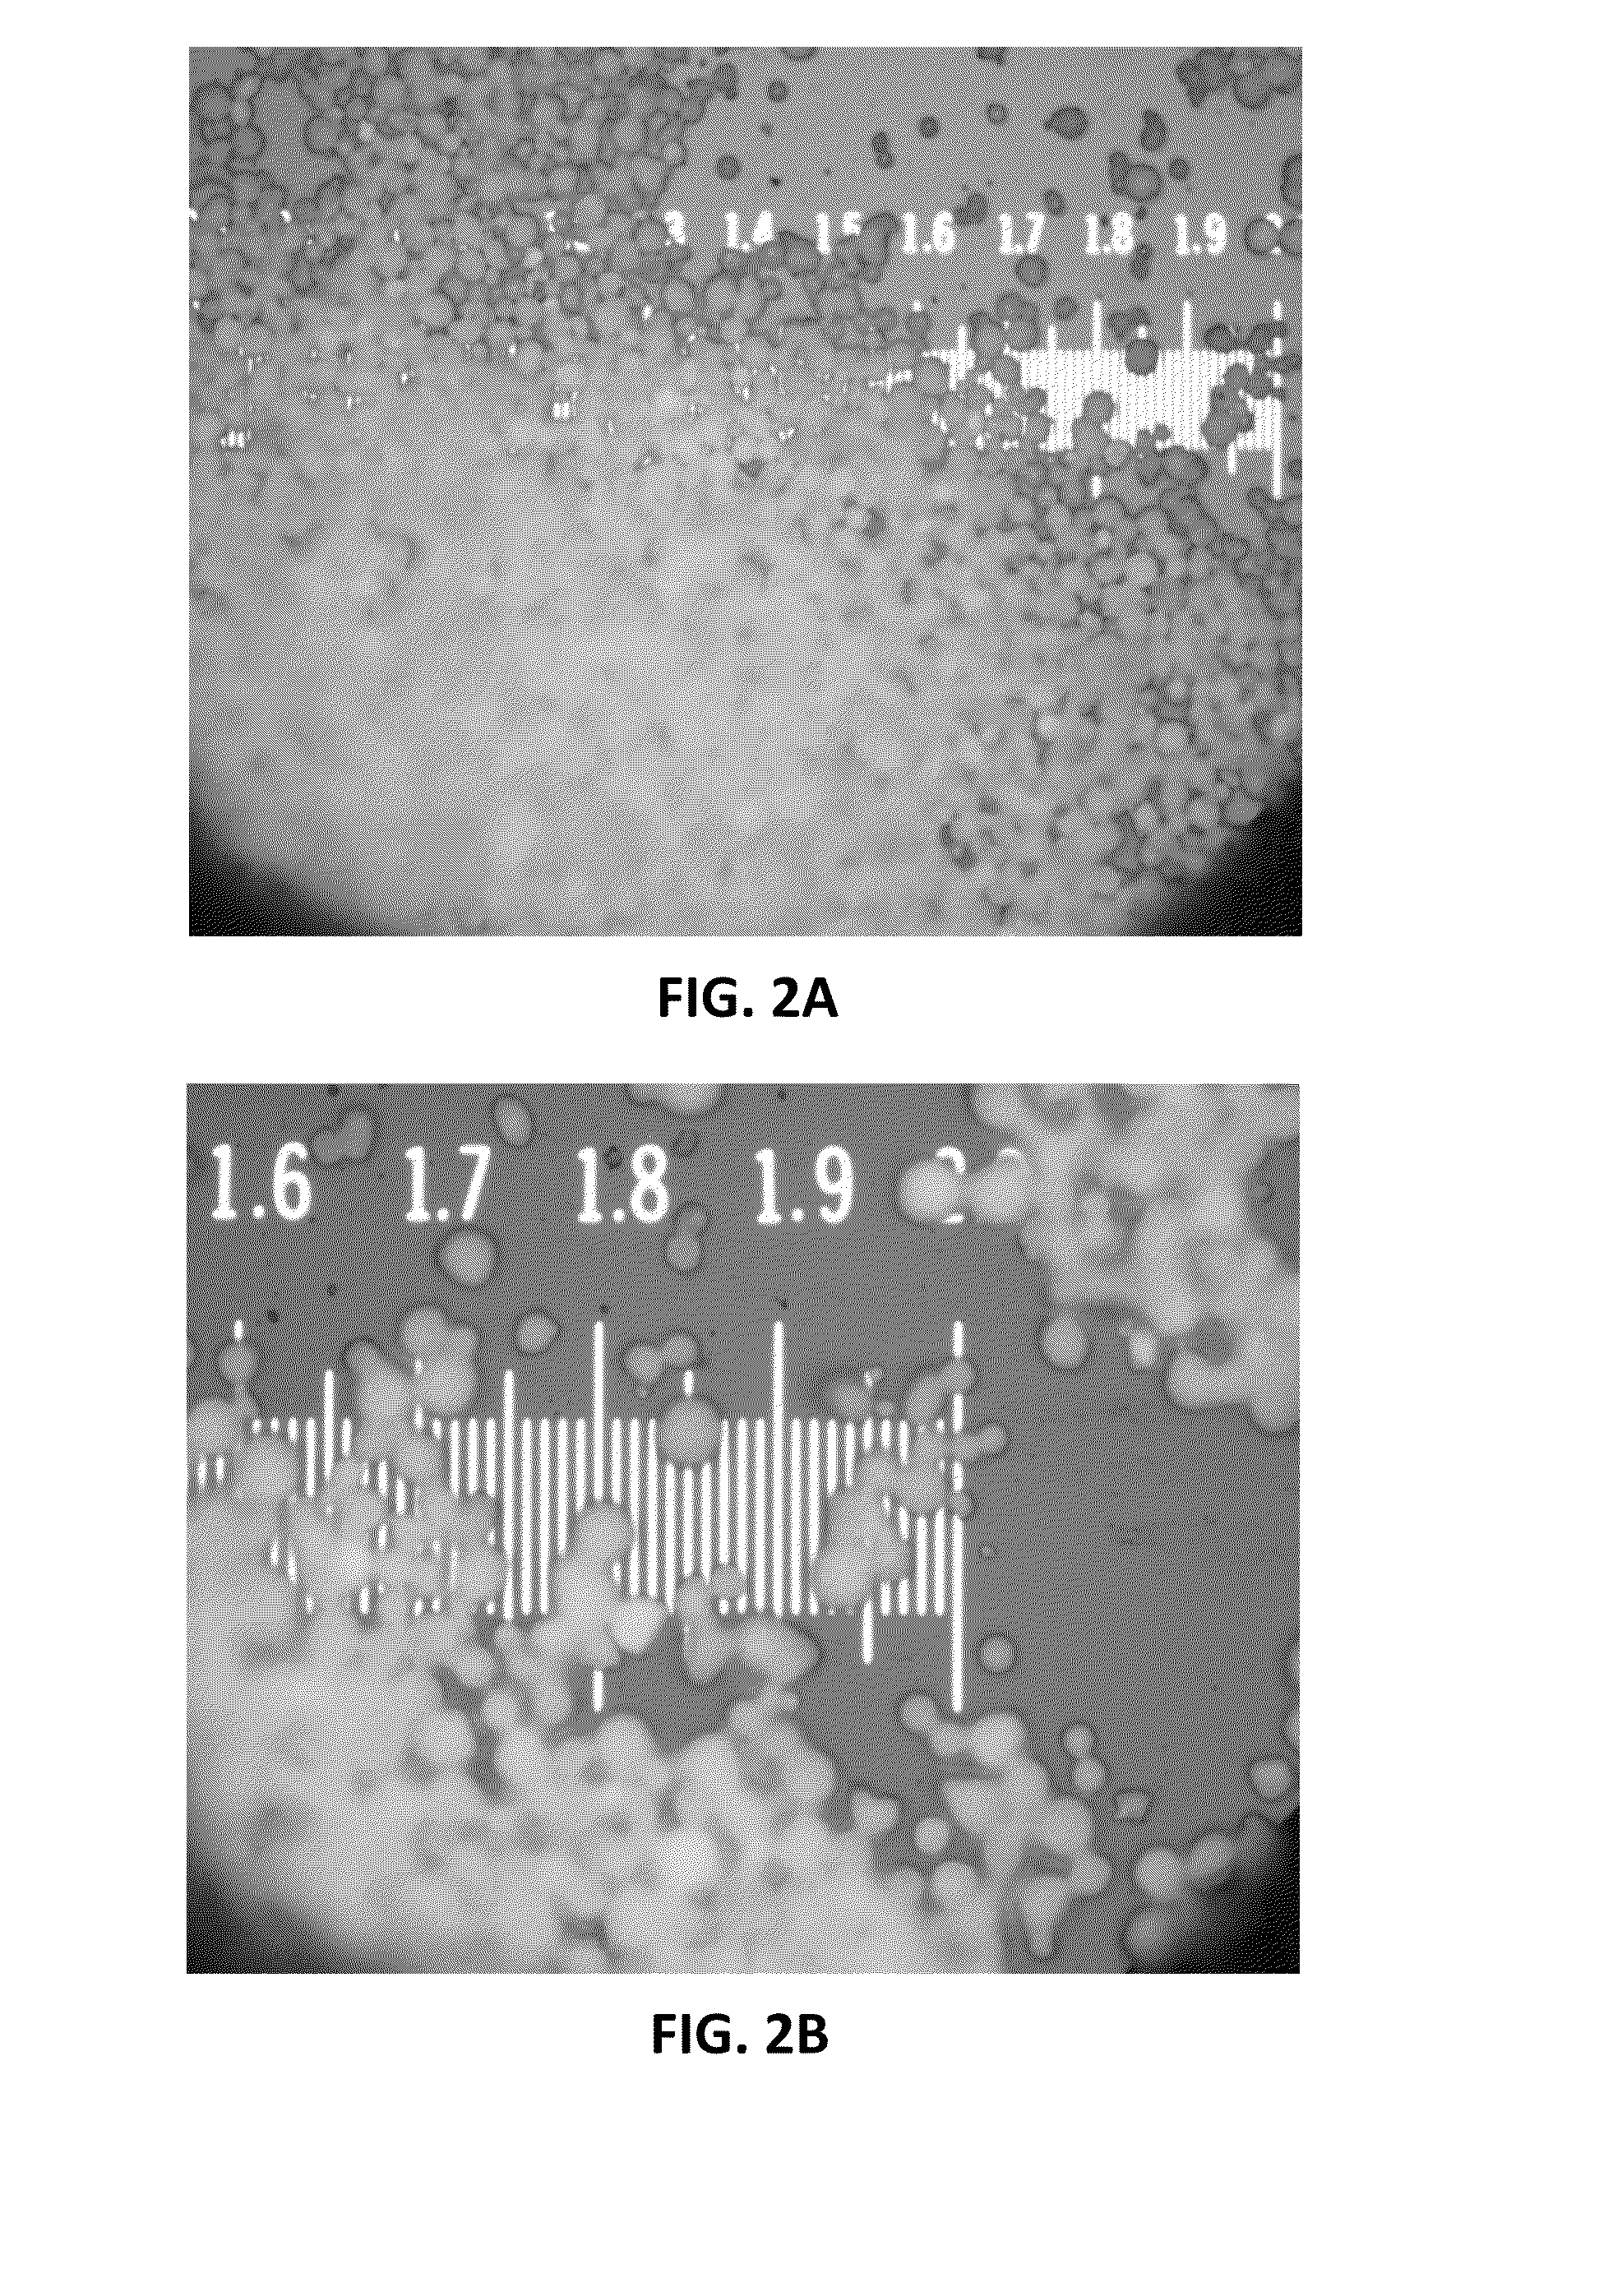 Method for densification and spheroidization of solid and solution precursor droplets of materials using microwave generated plasma processing